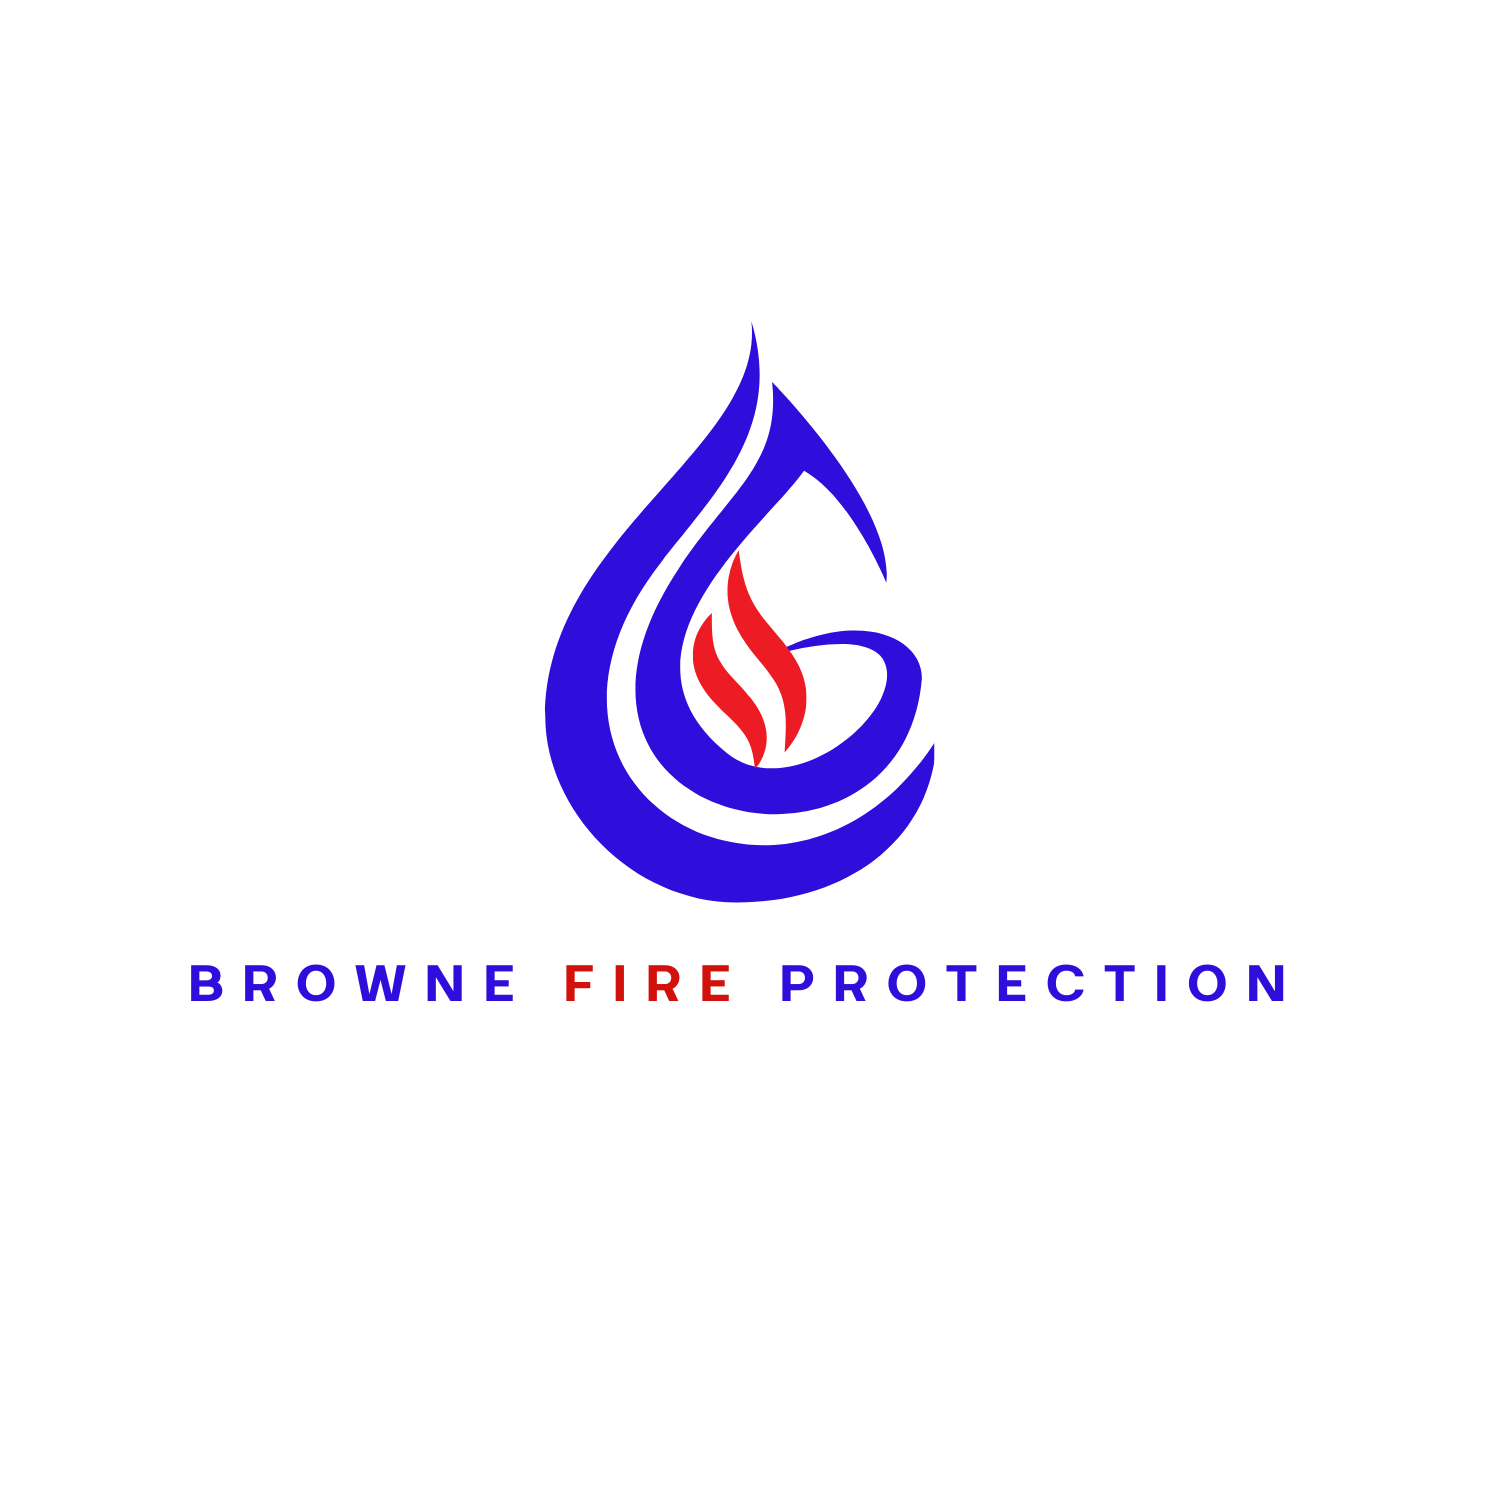 Browne Fire Protection Limited